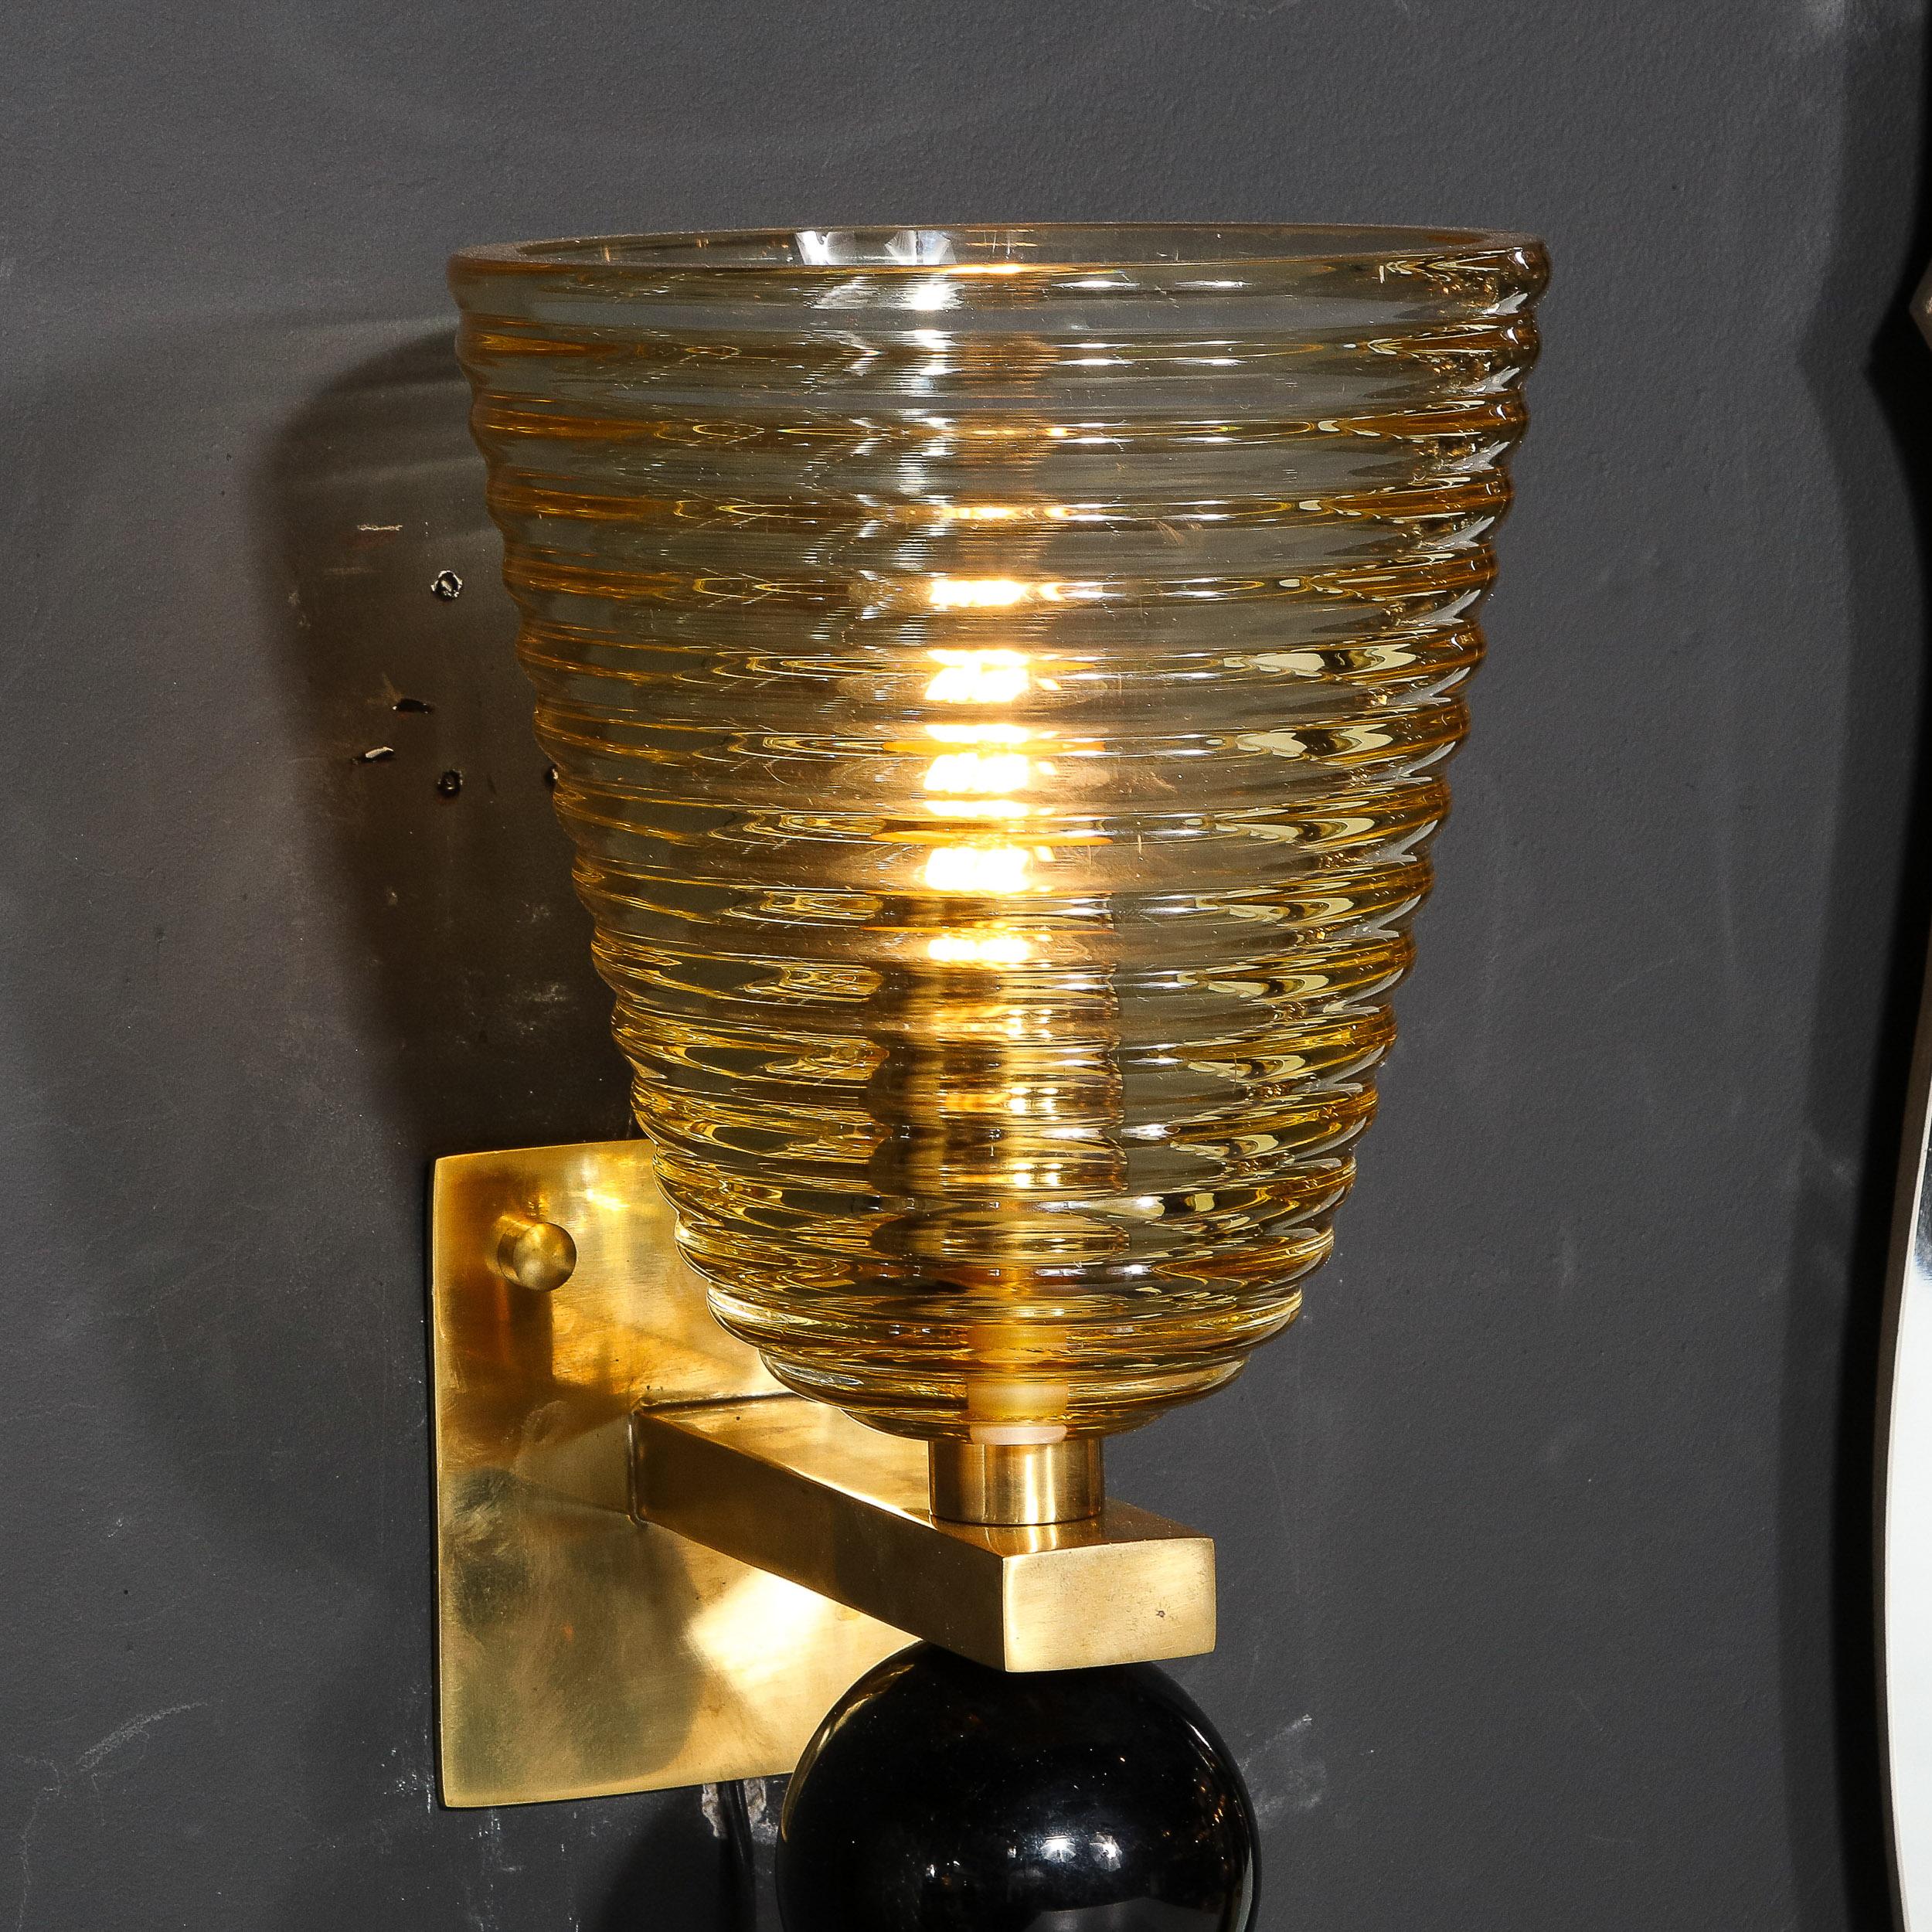 Pair of Modernist Hand-Blown Murano Hive Glass Form Sconces w/ Jet Black Orbital For Sale 2